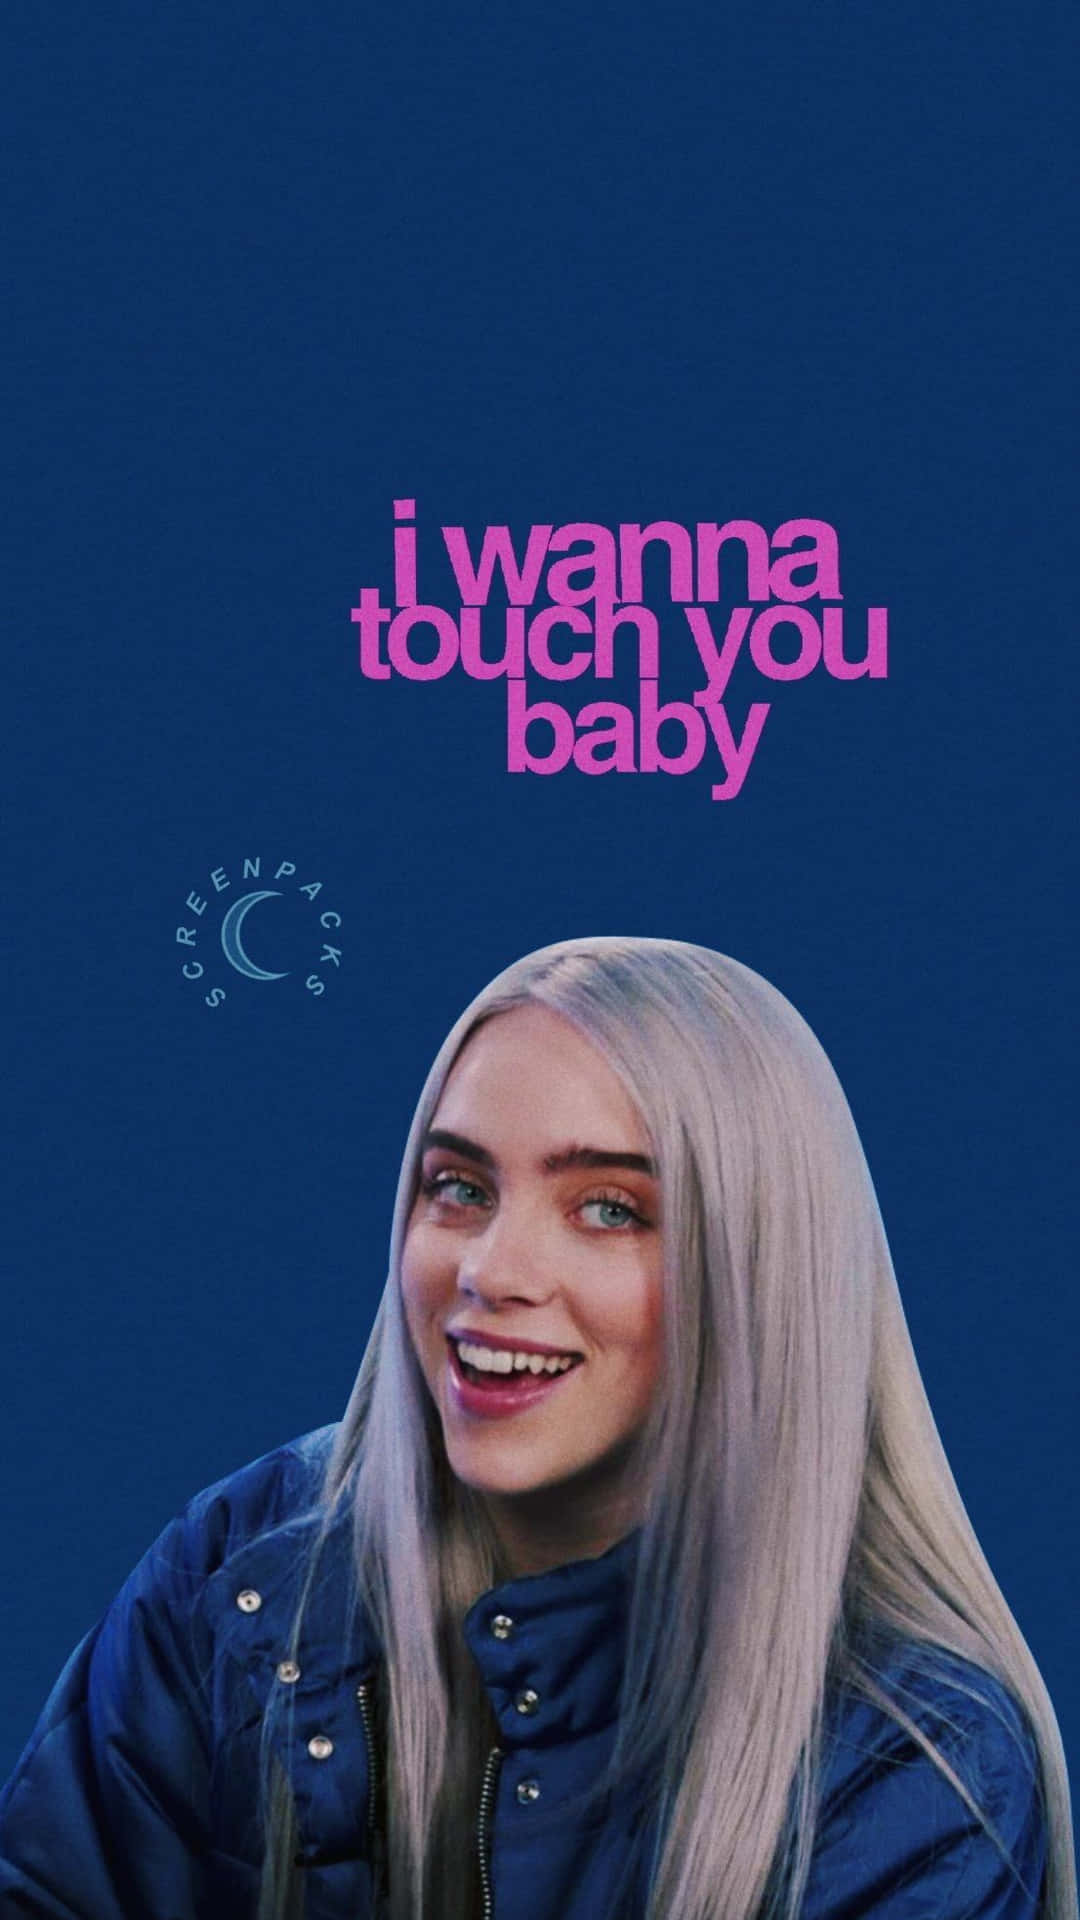 Billie Eilish radiates positivity and joy with her infectious smile Wallpaper